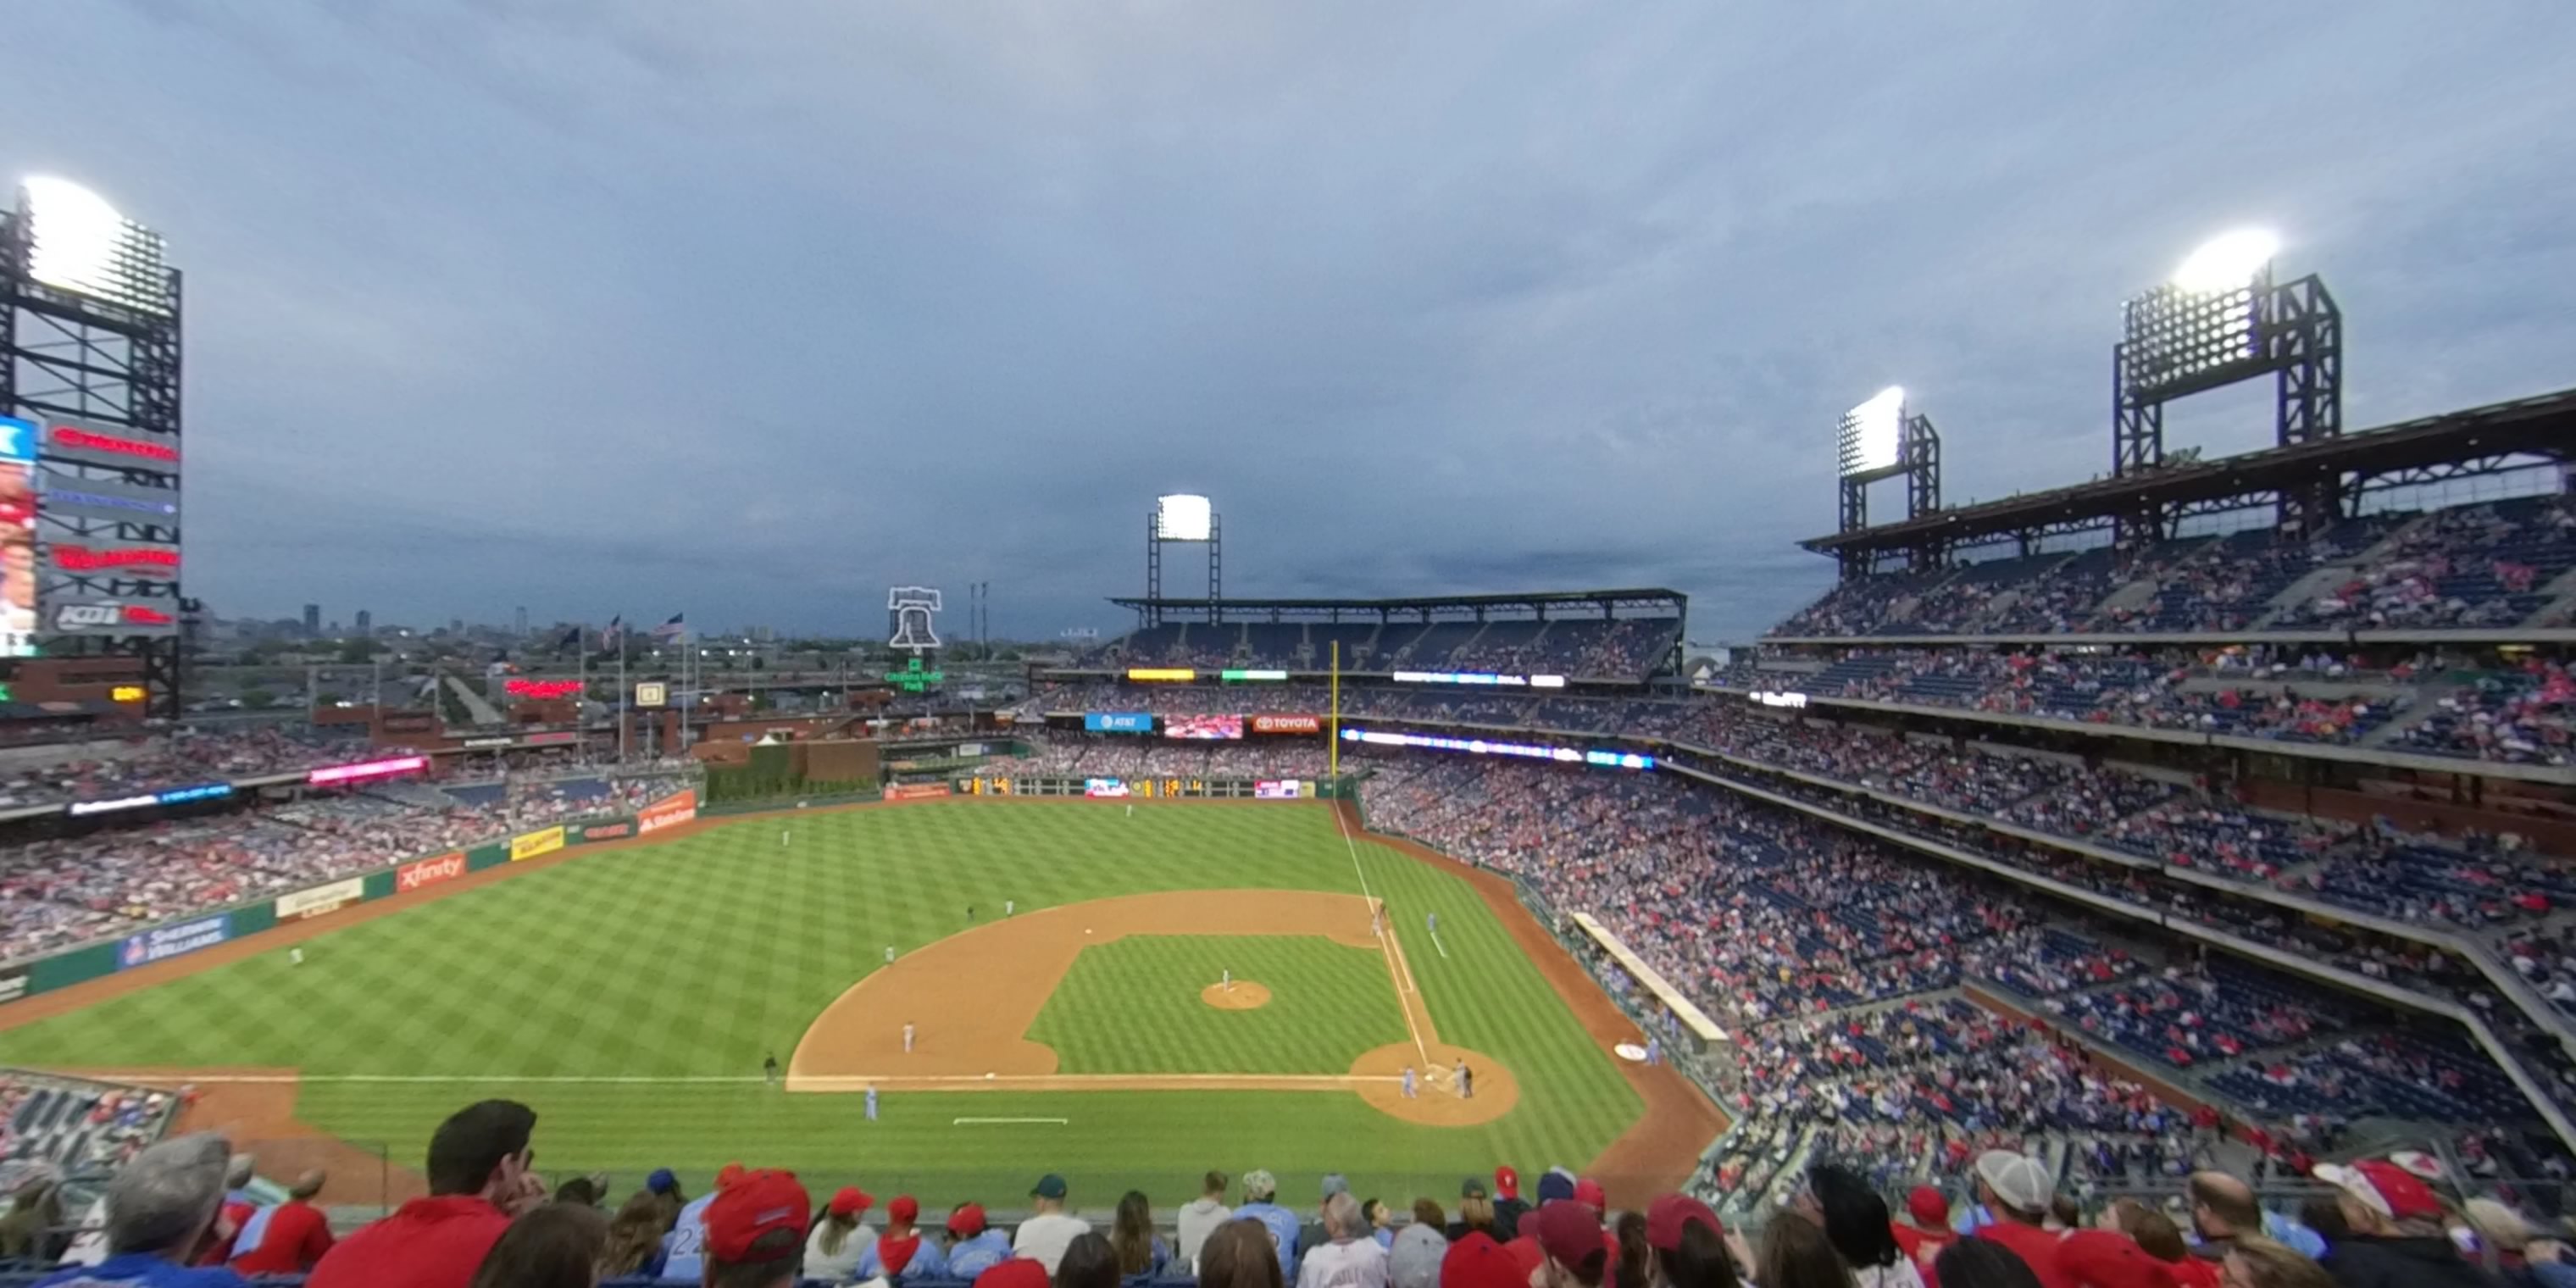 Section 326 at Citizens Bank Park - RateYourSeats.com